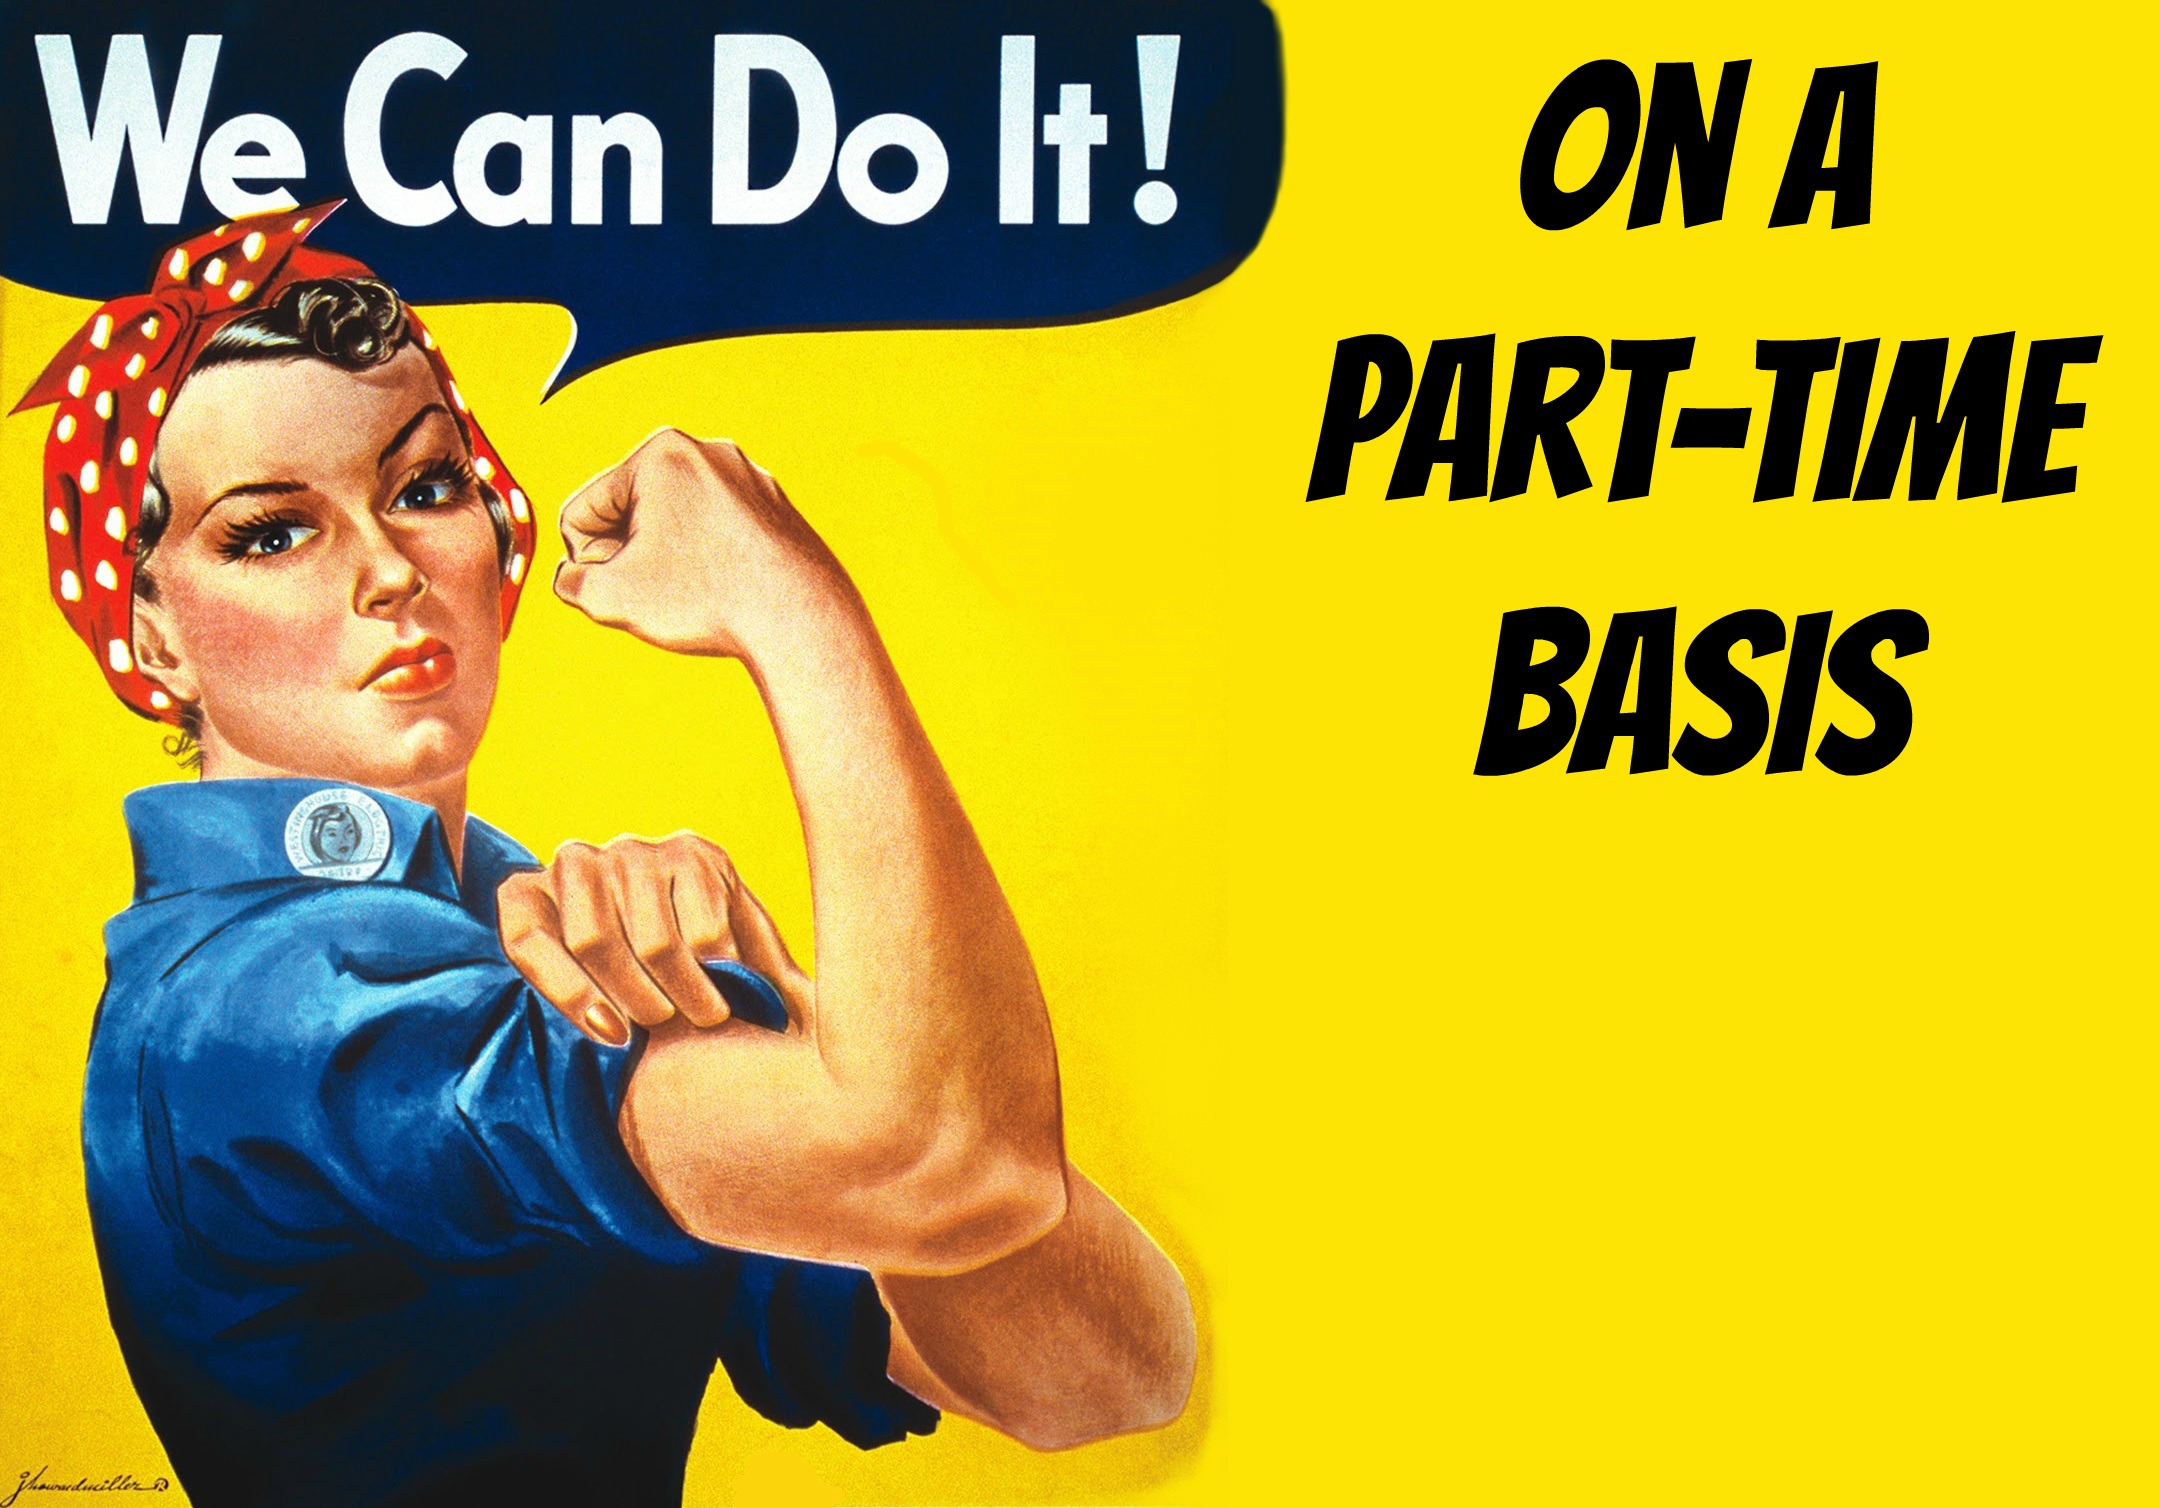 rosie the riveter part-time basis